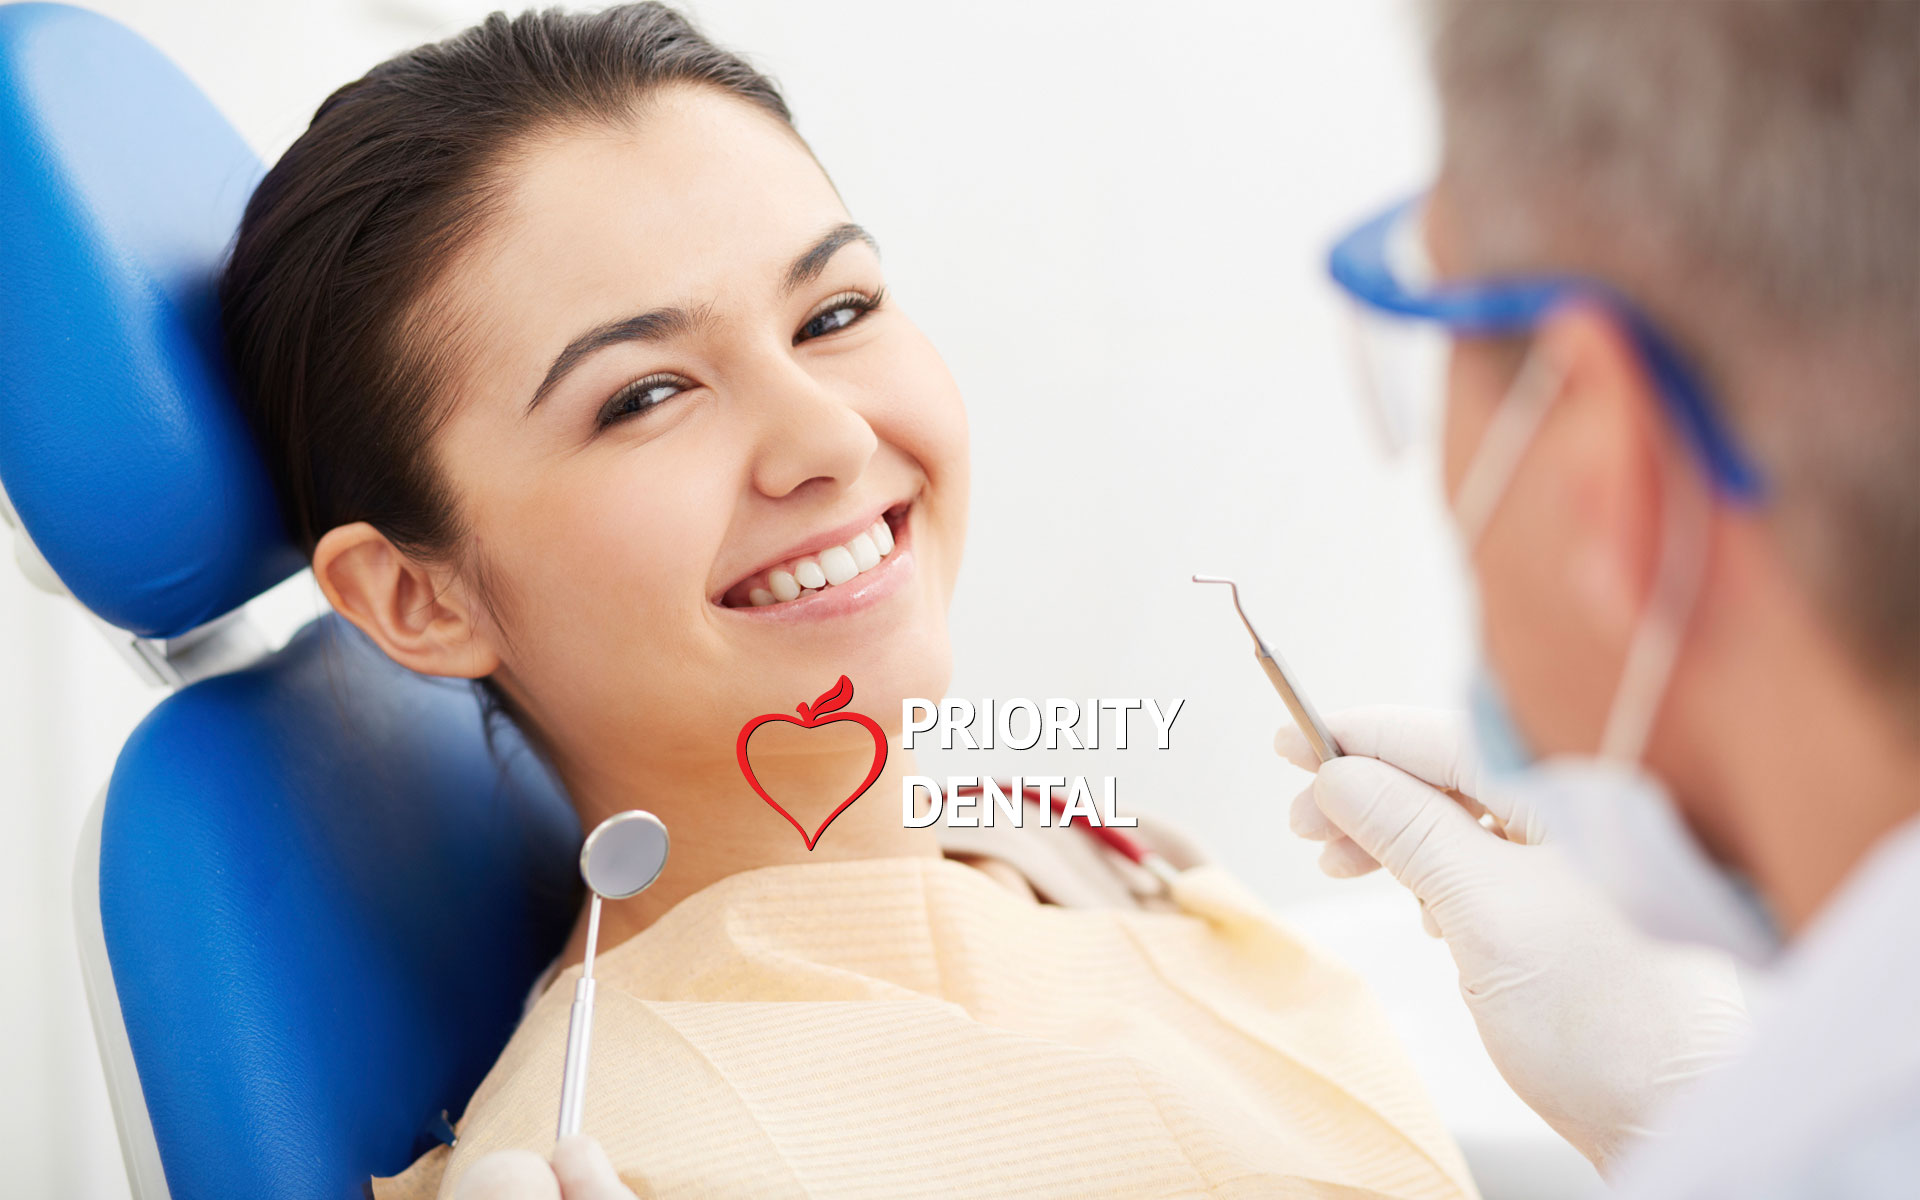 Priority Dental Group Chino - Your Chino Dentist